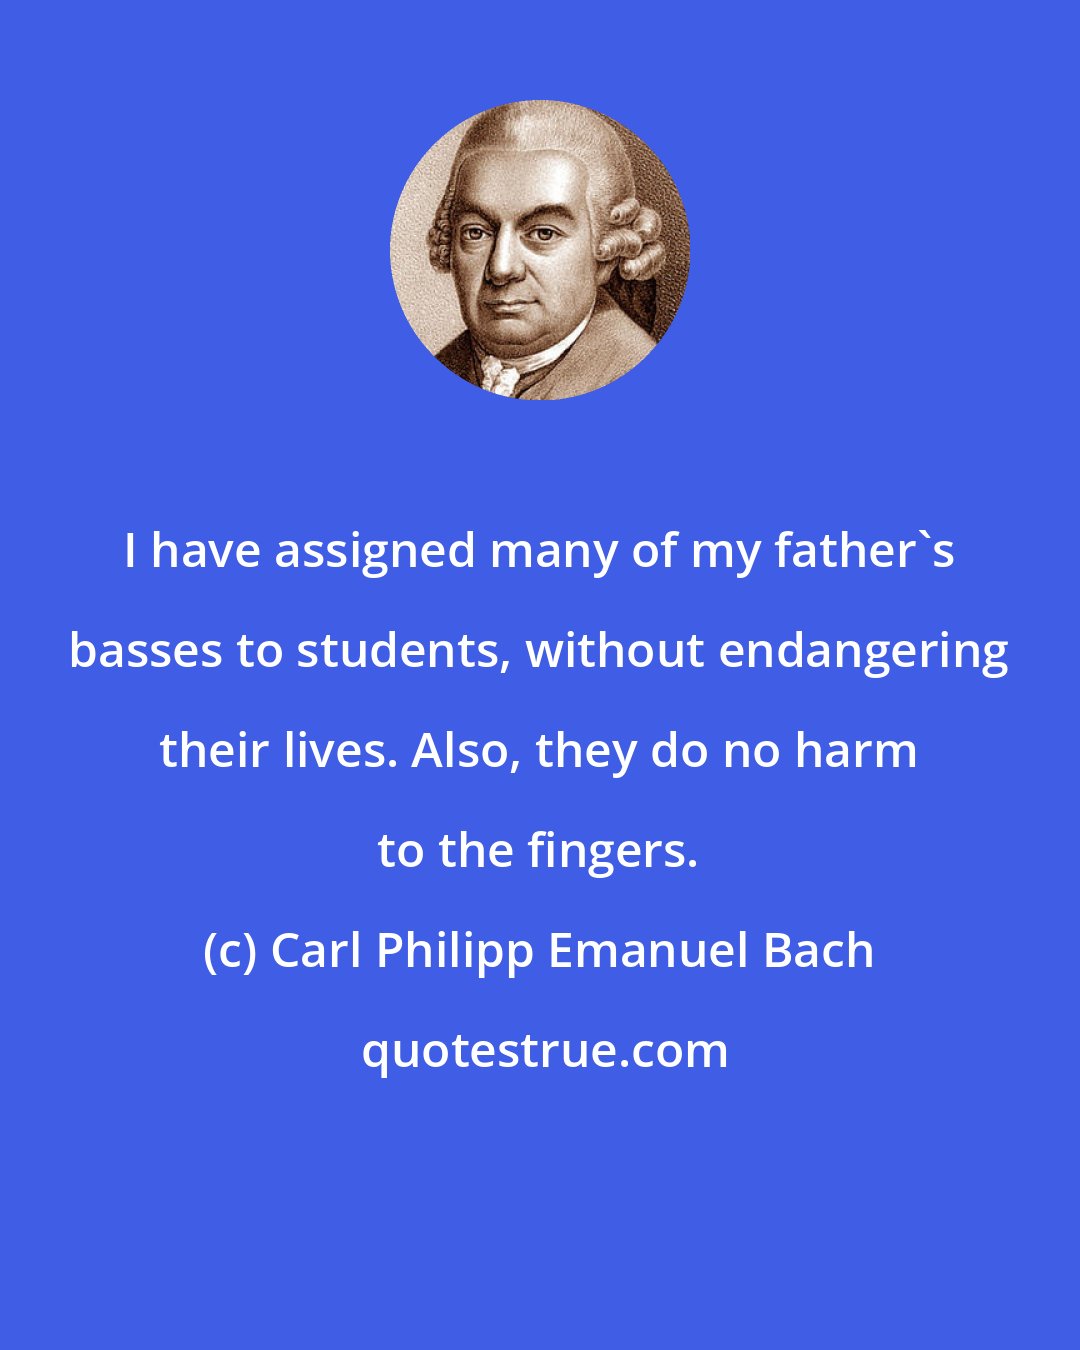 Carl Philipp Emanuel Bach: I have assigned many of my father's basses to students, without endangering their lives. Also, they do no harm to the fingers.